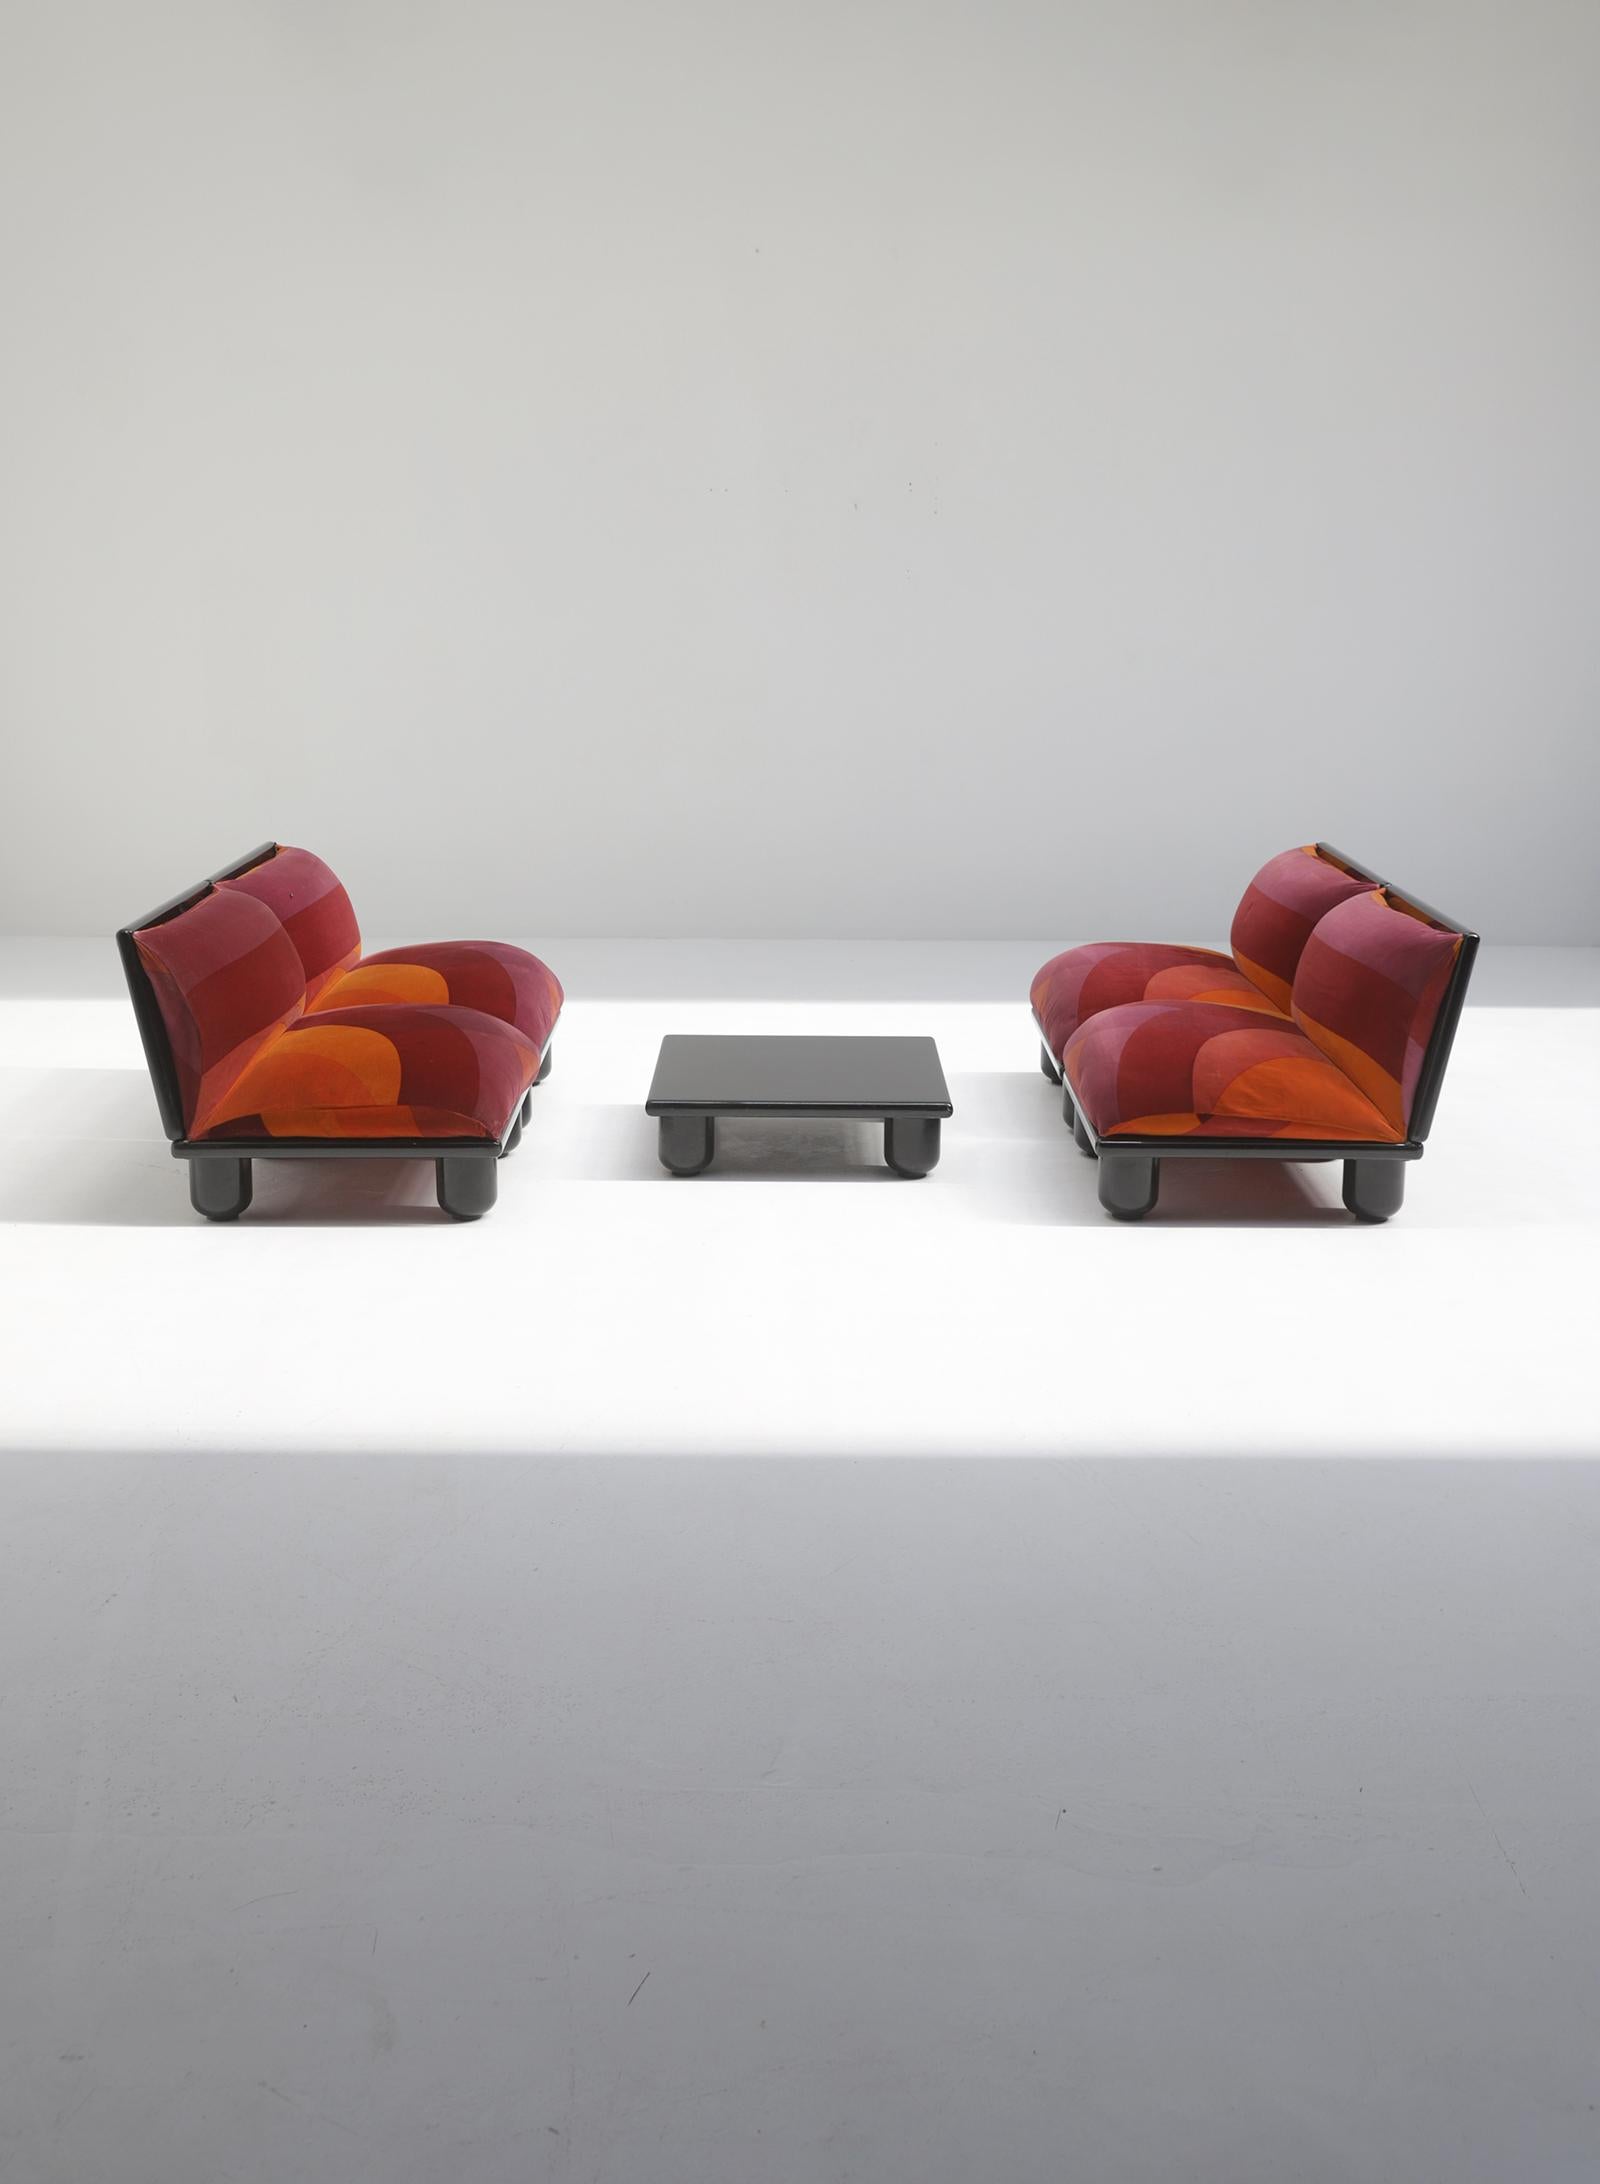 This set was already on my wishlist for a long time! The Carlo Bartoli Blop sofa elements was fabricated in 1972 by Rossi di Albizzate. It survived extremely well after 50 years. It is still in good condition. The original eye-catching fabric looks